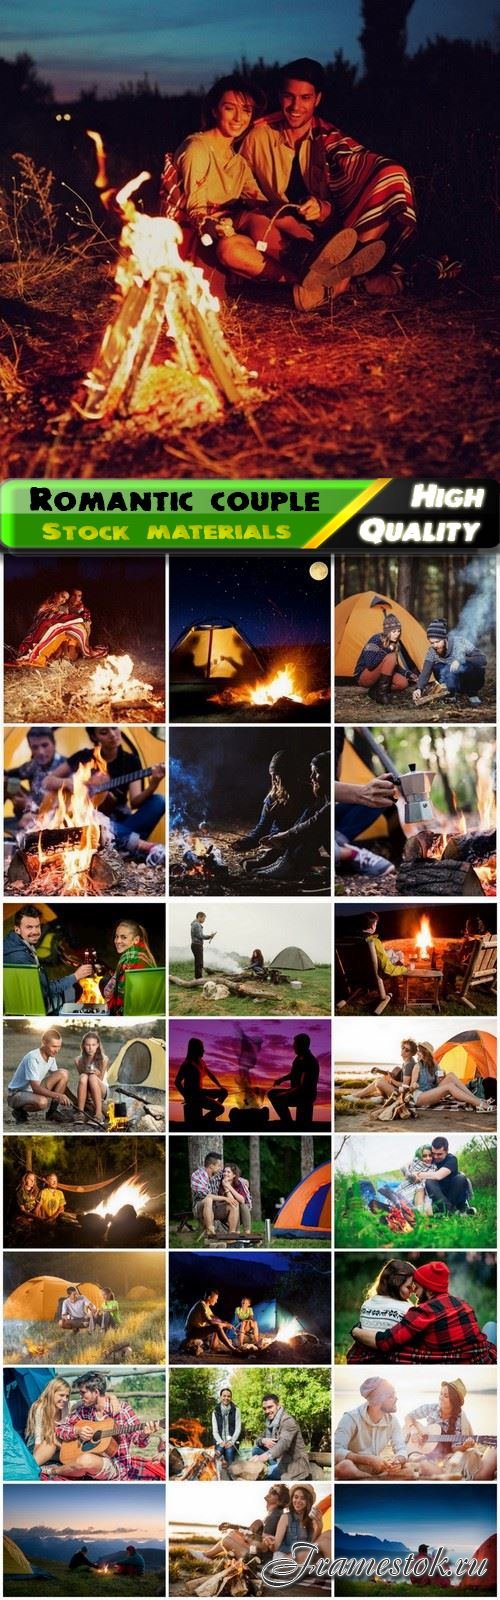 Romantic couple of man and woman hugging by the campfire - 25 Jpg